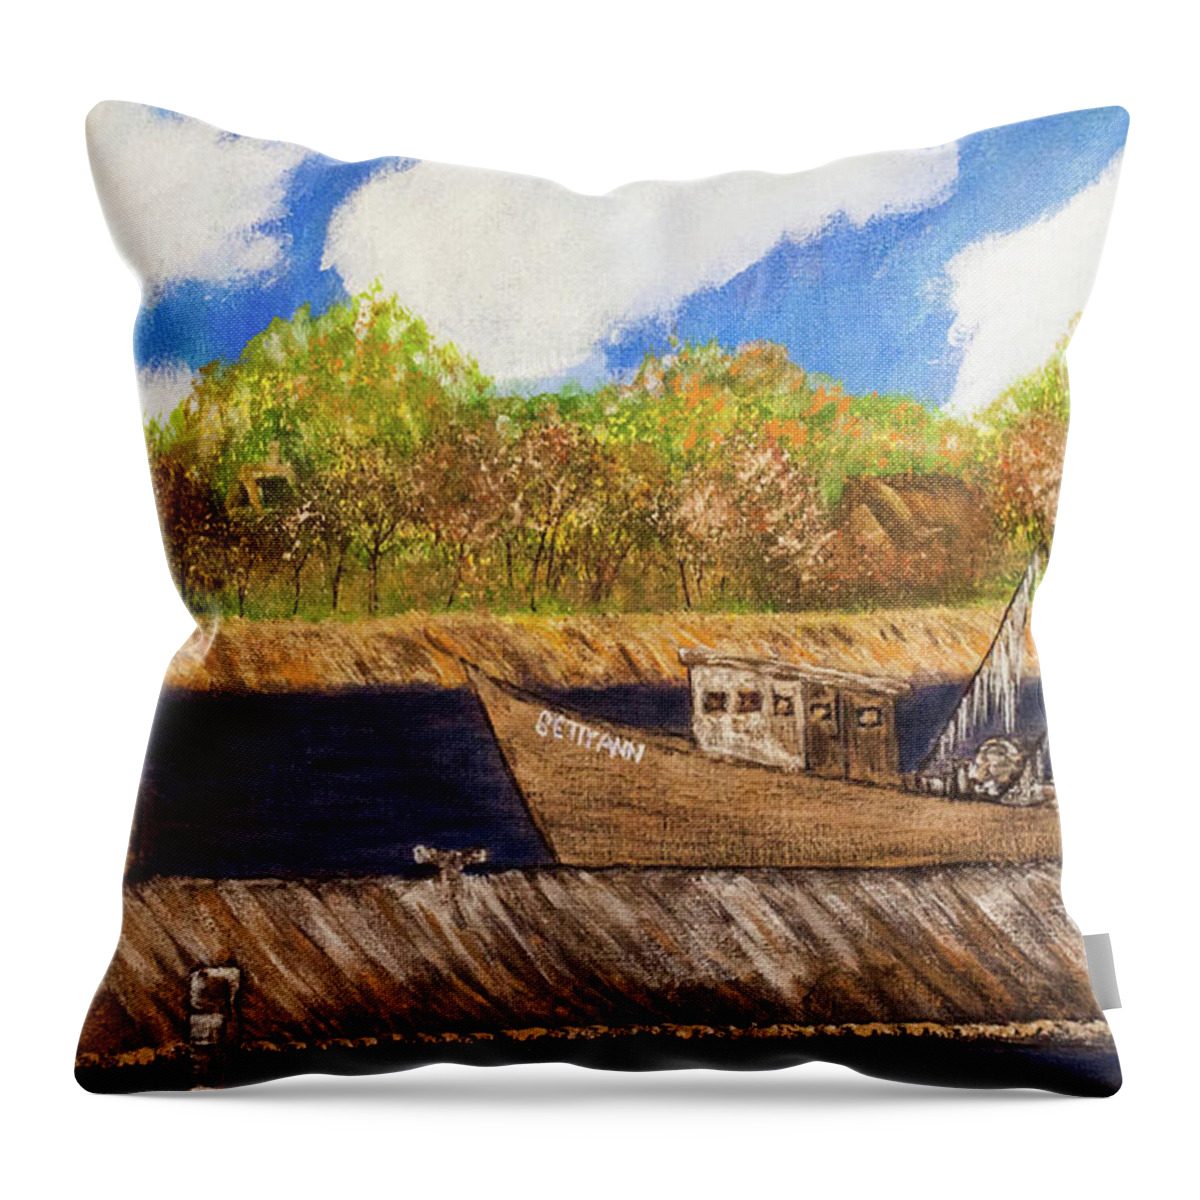 Betty Throw Pillow featuring the painting Betty Ann by Randy Sylvia